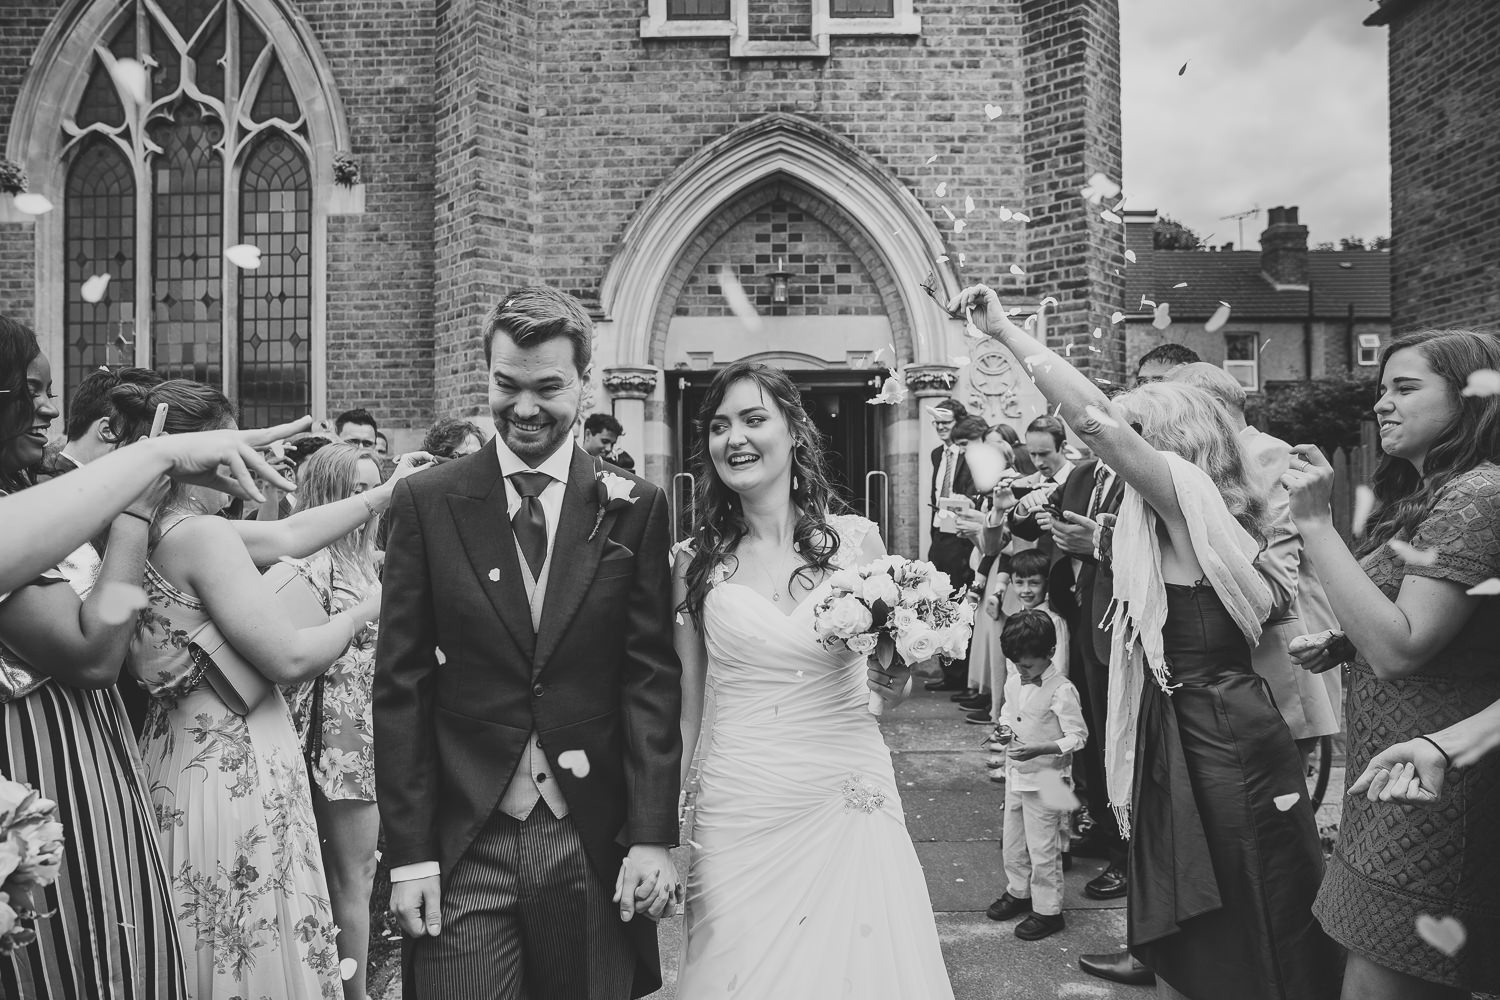 Black and white wedding photo of bride and groom walking through wedding confetti looking very happy